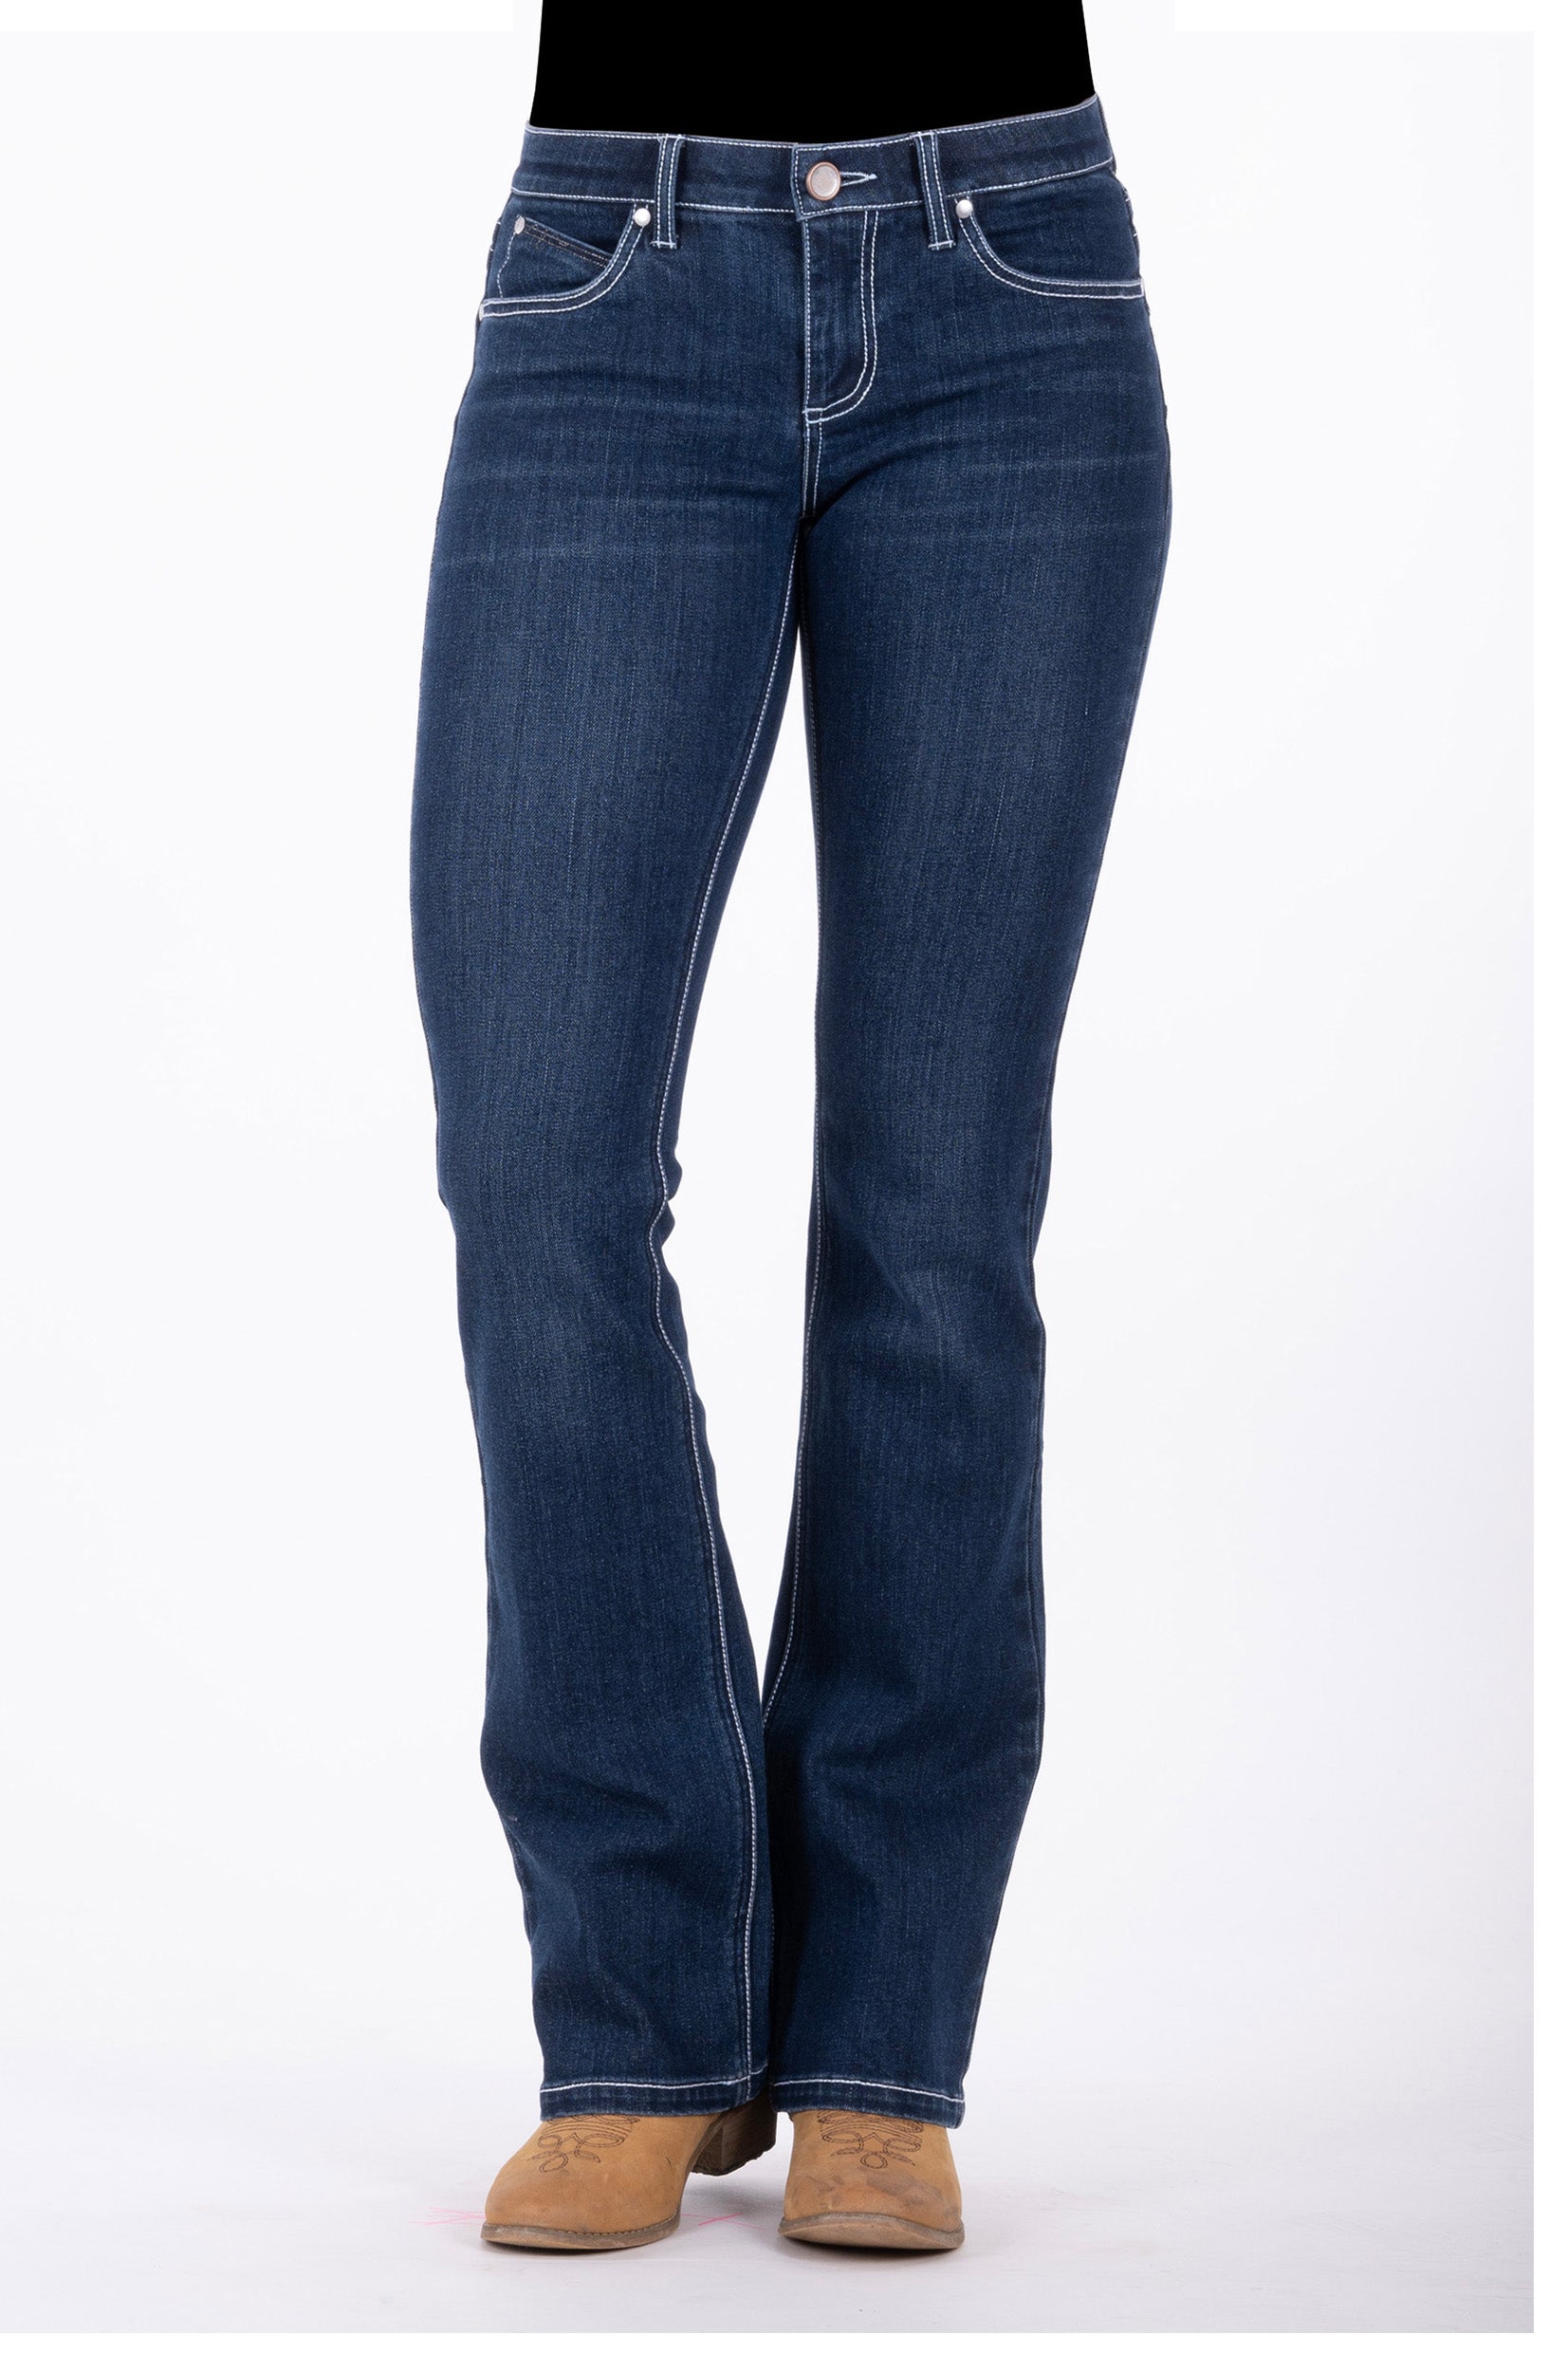 Wrangler Women's Amelia Q-Baby Jeans - The Trading Stables